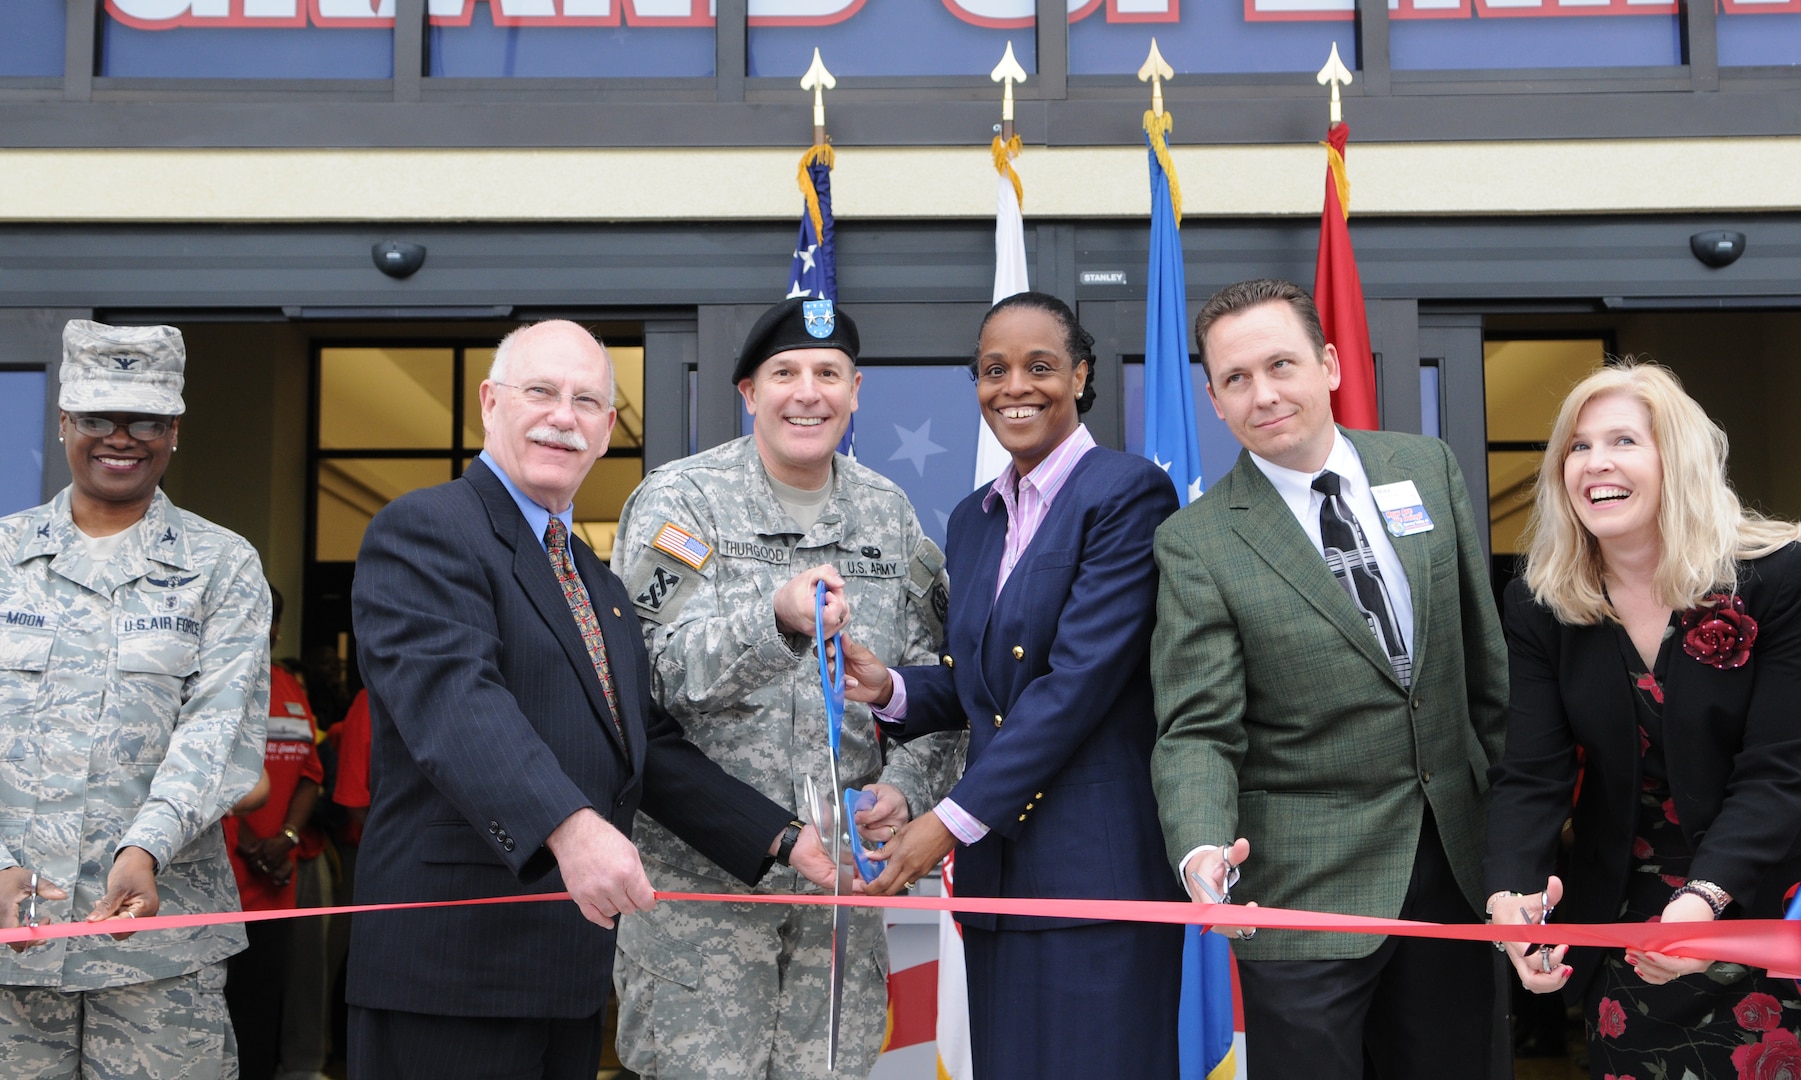 Doors to the new Randolph Air Force Base Exchange opened March 5, with a ribbon cutting ceremony. Event officials cutting the ribbon are (L-R), Col. Soledad Lindo-Moon, 359th Medical Group commander, Robert Graves, Army Maj. Gen. Keith Thurgood, Army and Air Force Exchange Service commander, Shelly Armstrong, Mike Einer, and Mrs. Darllene Kullberg. The new Building is AAFES' first environmentally friendly "green" BX, using energy-effecient glass, lighting, 40 percent recycled material carpet, and HVAC system to reduce the overall operating cost.(U.S. Air Force Photo By Don Lindsey)